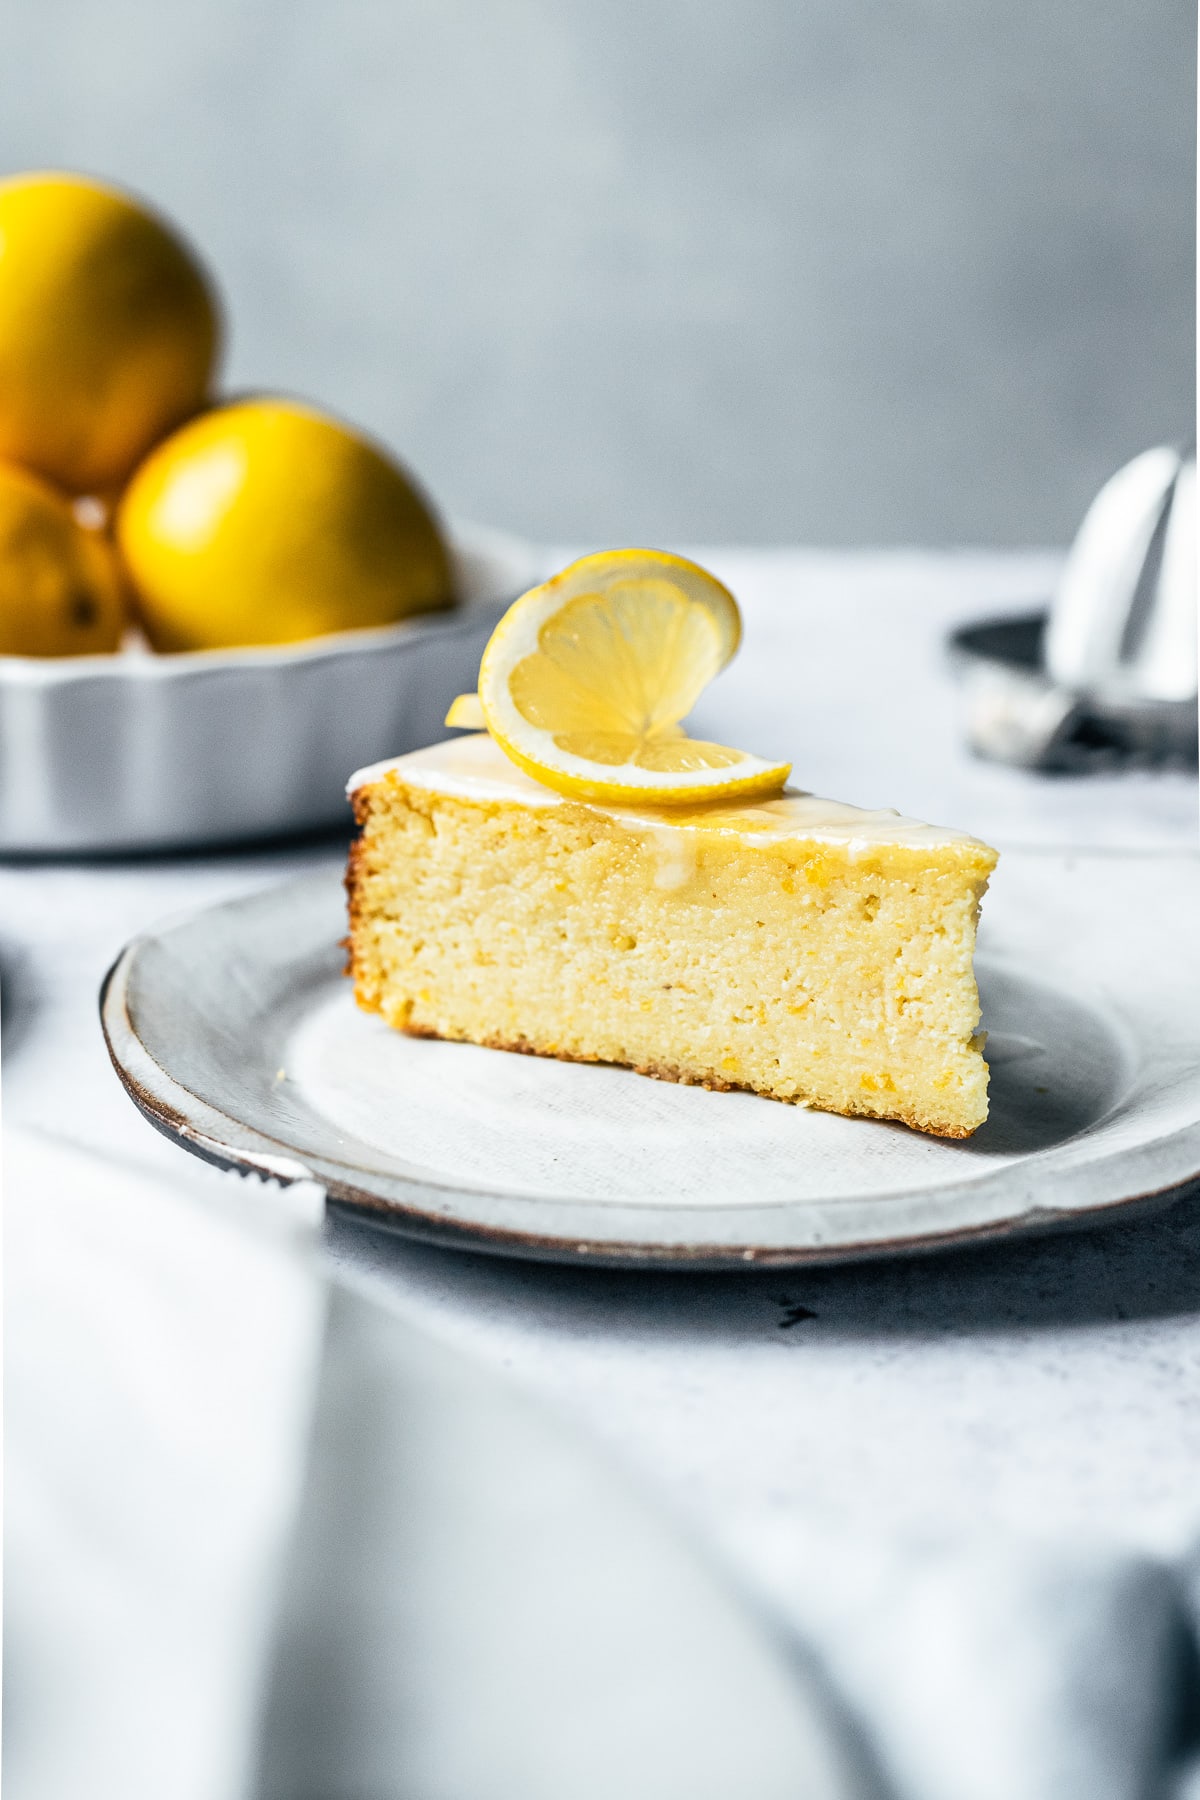 A close up side view of a slice of cake with a twisted lemon slice decoration on top, on a white ceramic plate. Lemons, a juicer, and a light blue napkin all surround the cake, slightly out of focus.